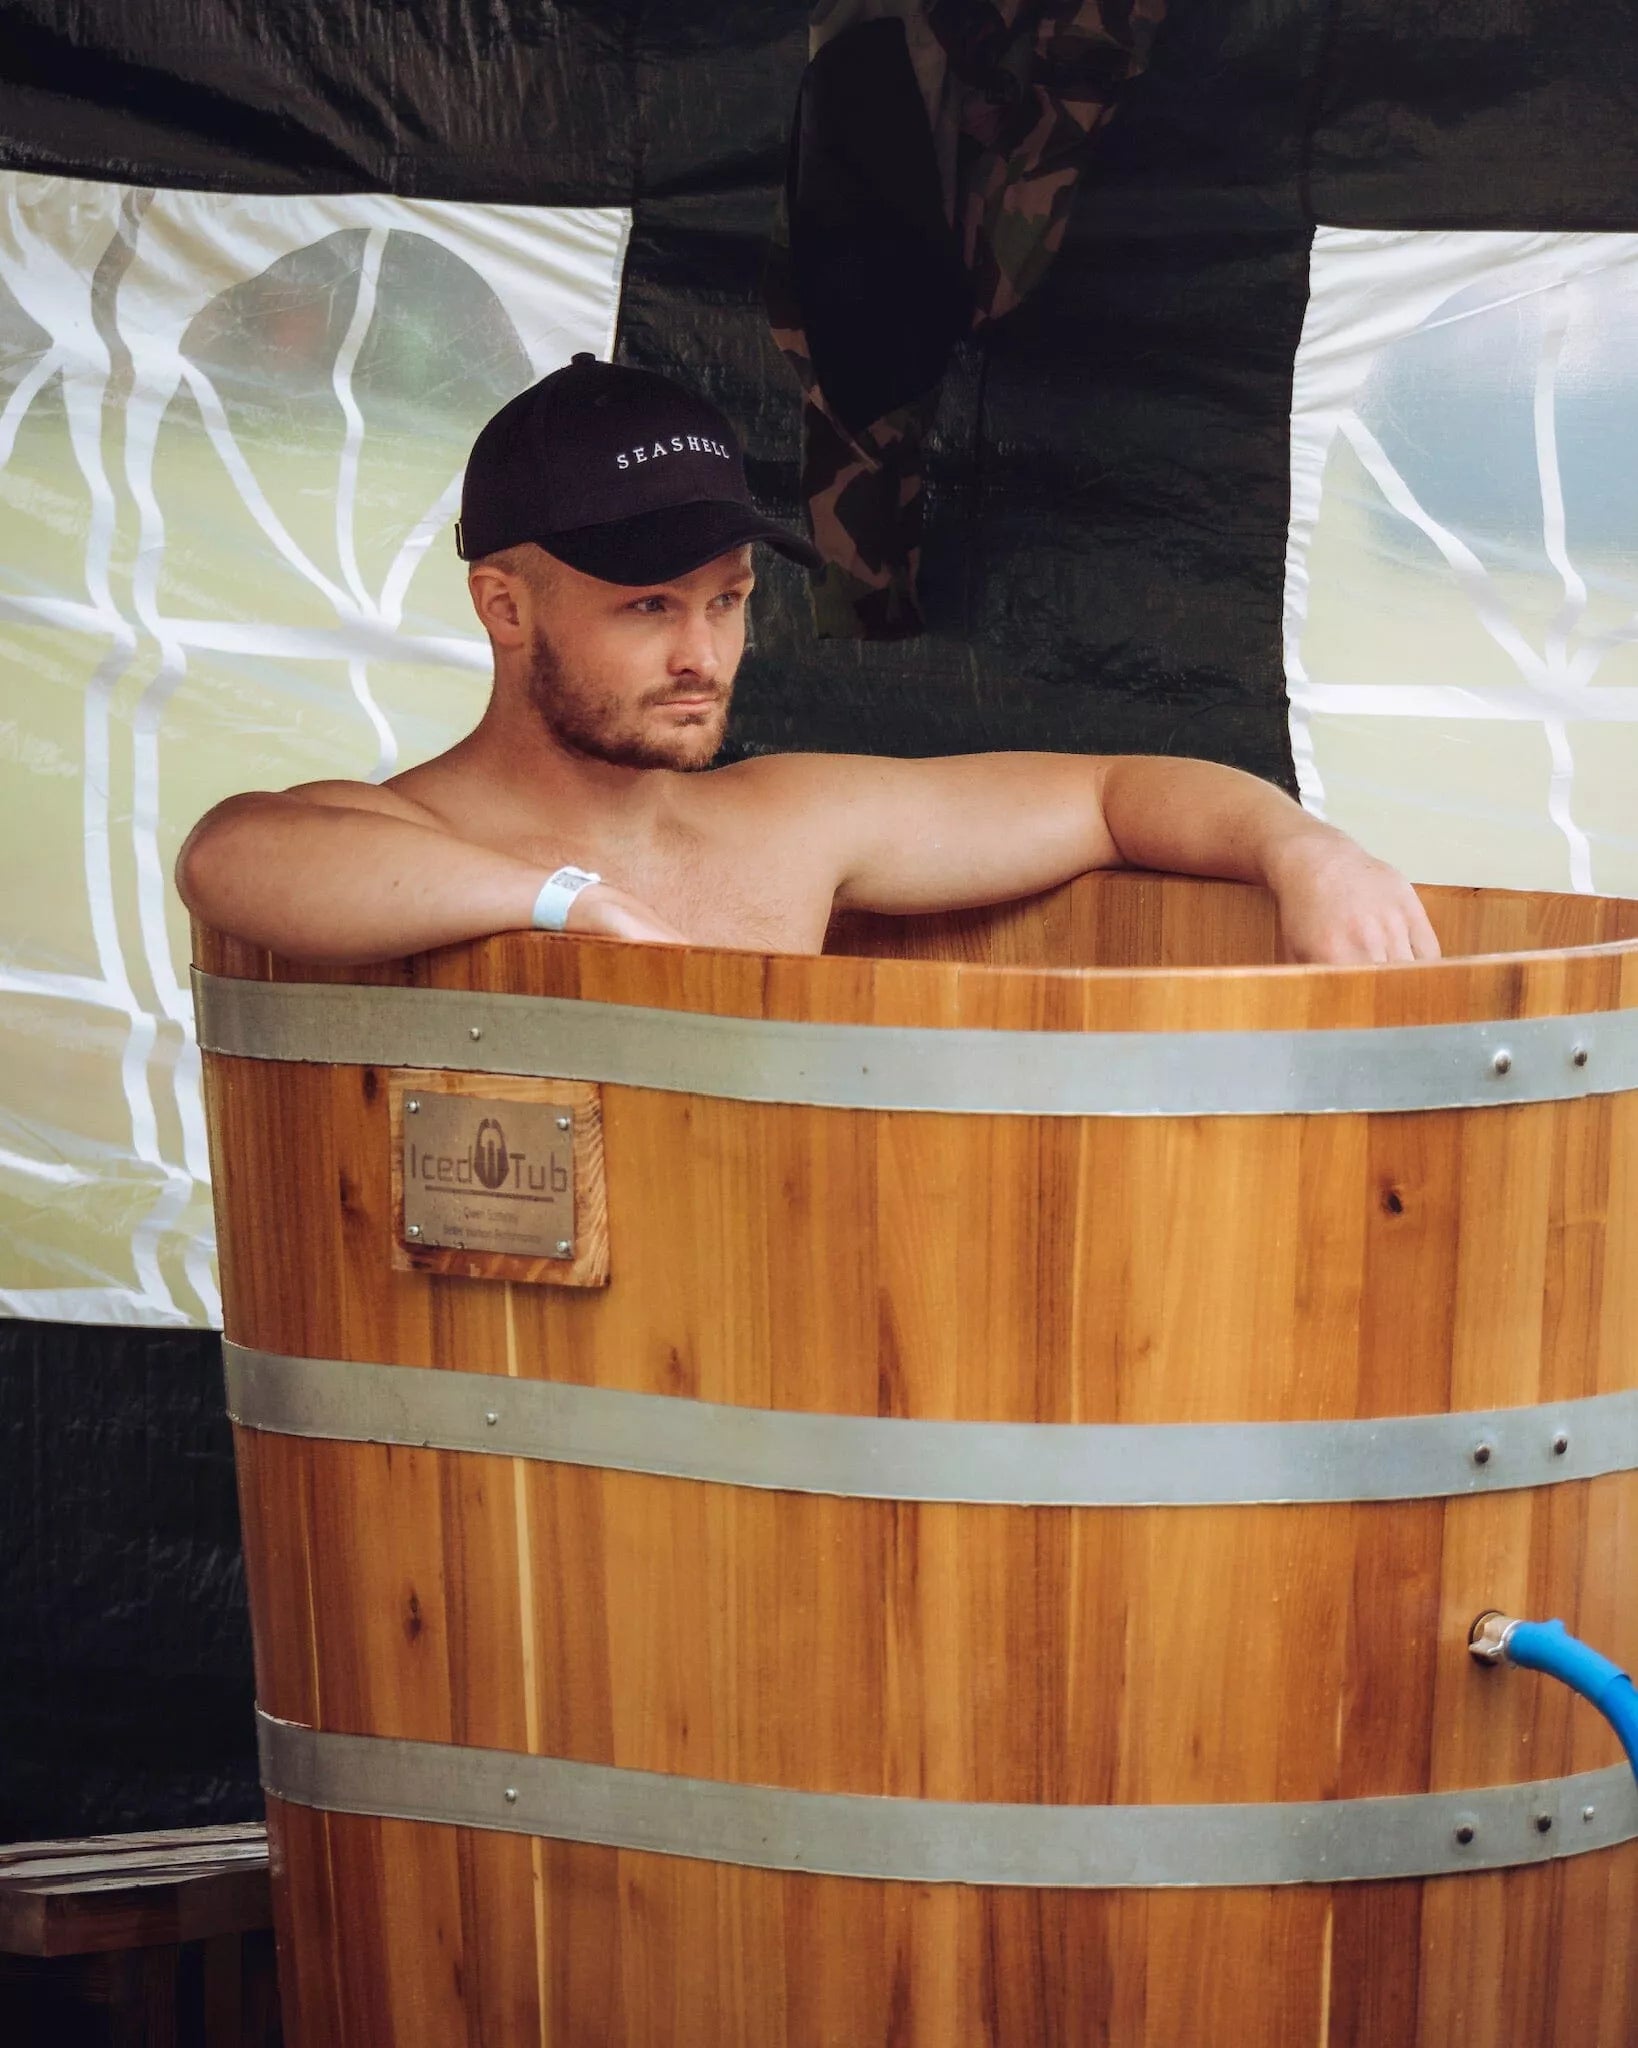 The Icy Bliss: The Physical and Mental Benefits of Ice Barrel Dips